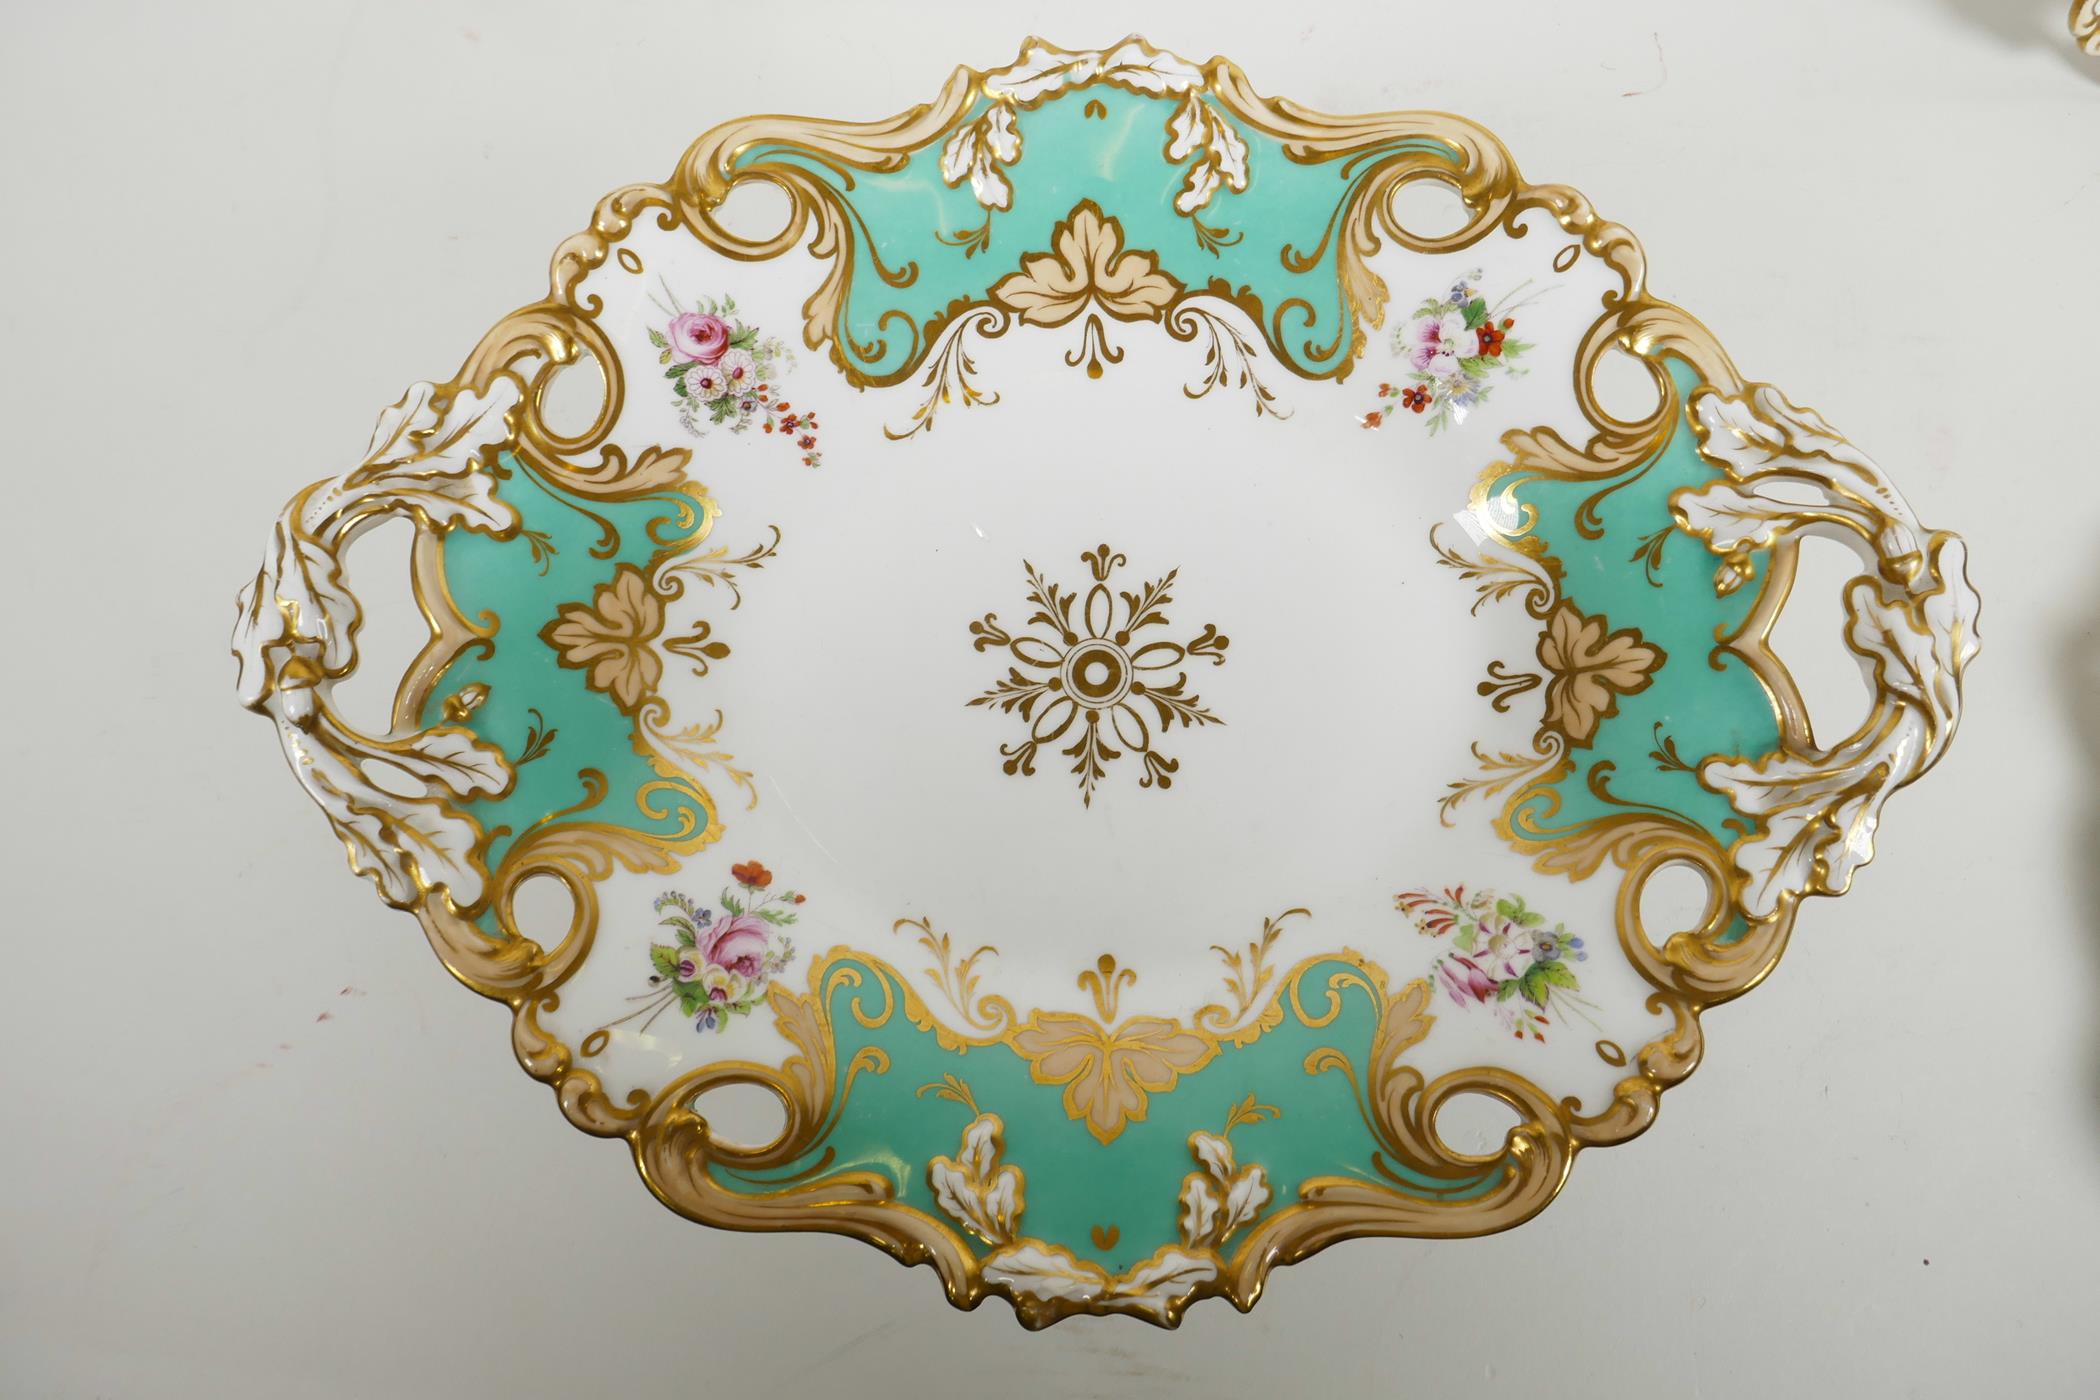 A rare 1840s Ridgway part dessert service with pedestal comport and four matching square dessert - Image 2 of 9